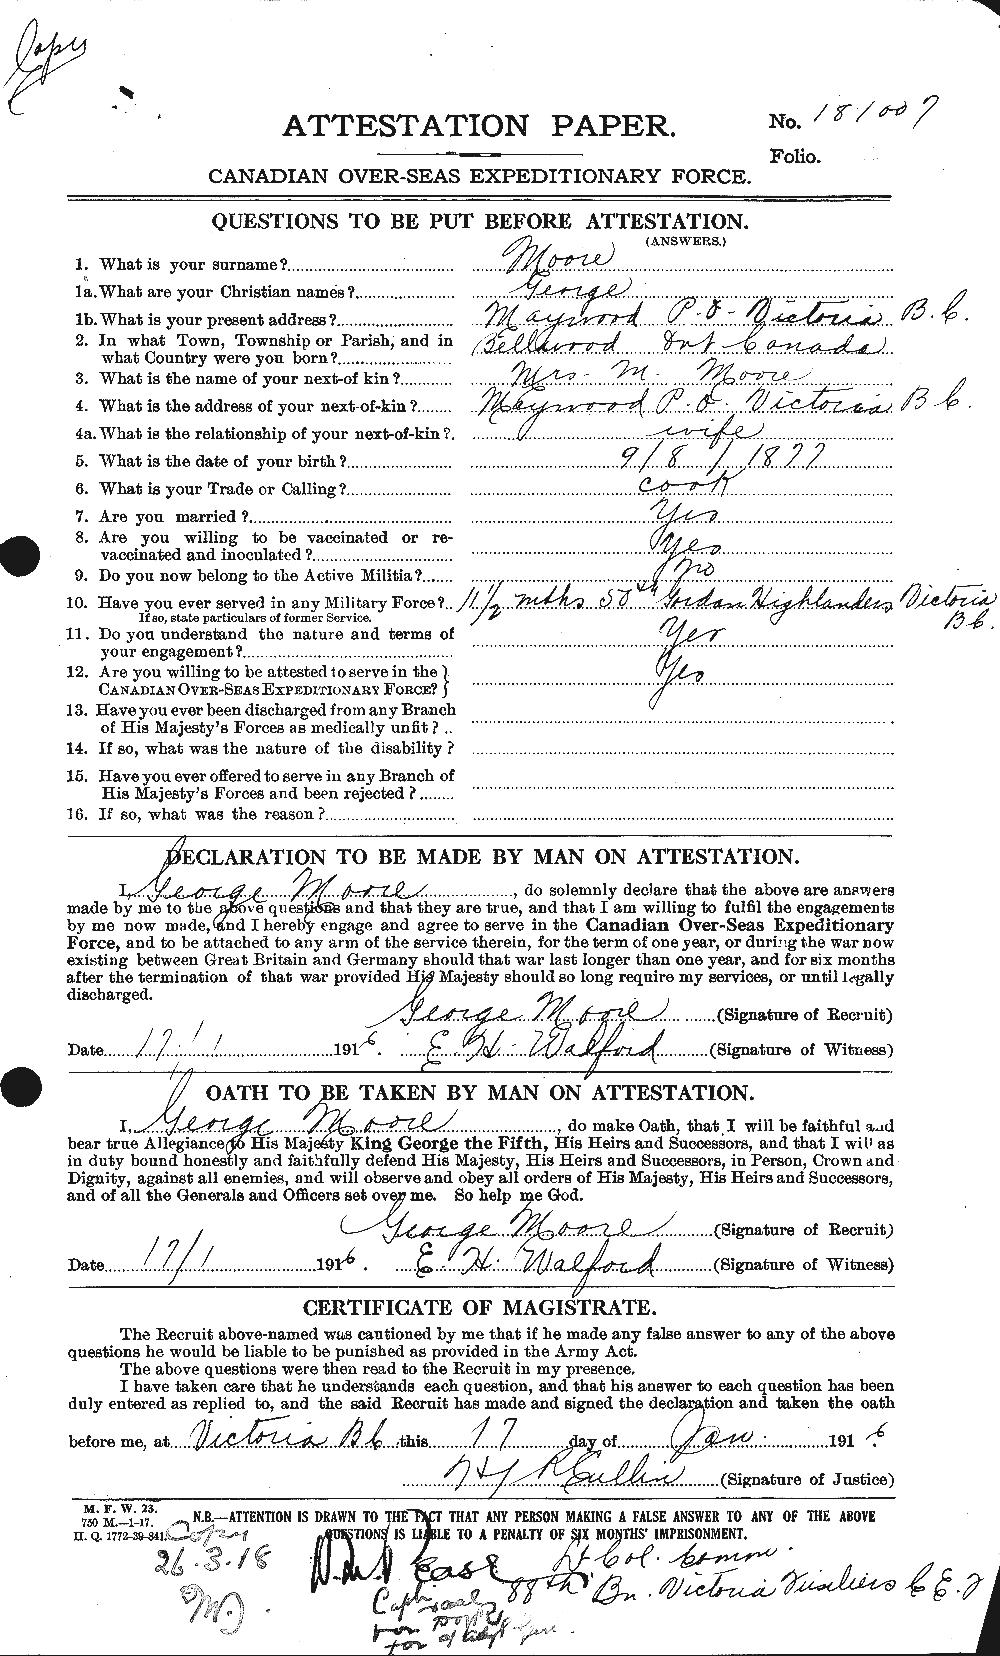 Personnel Records of the First World War - CEF 509384a